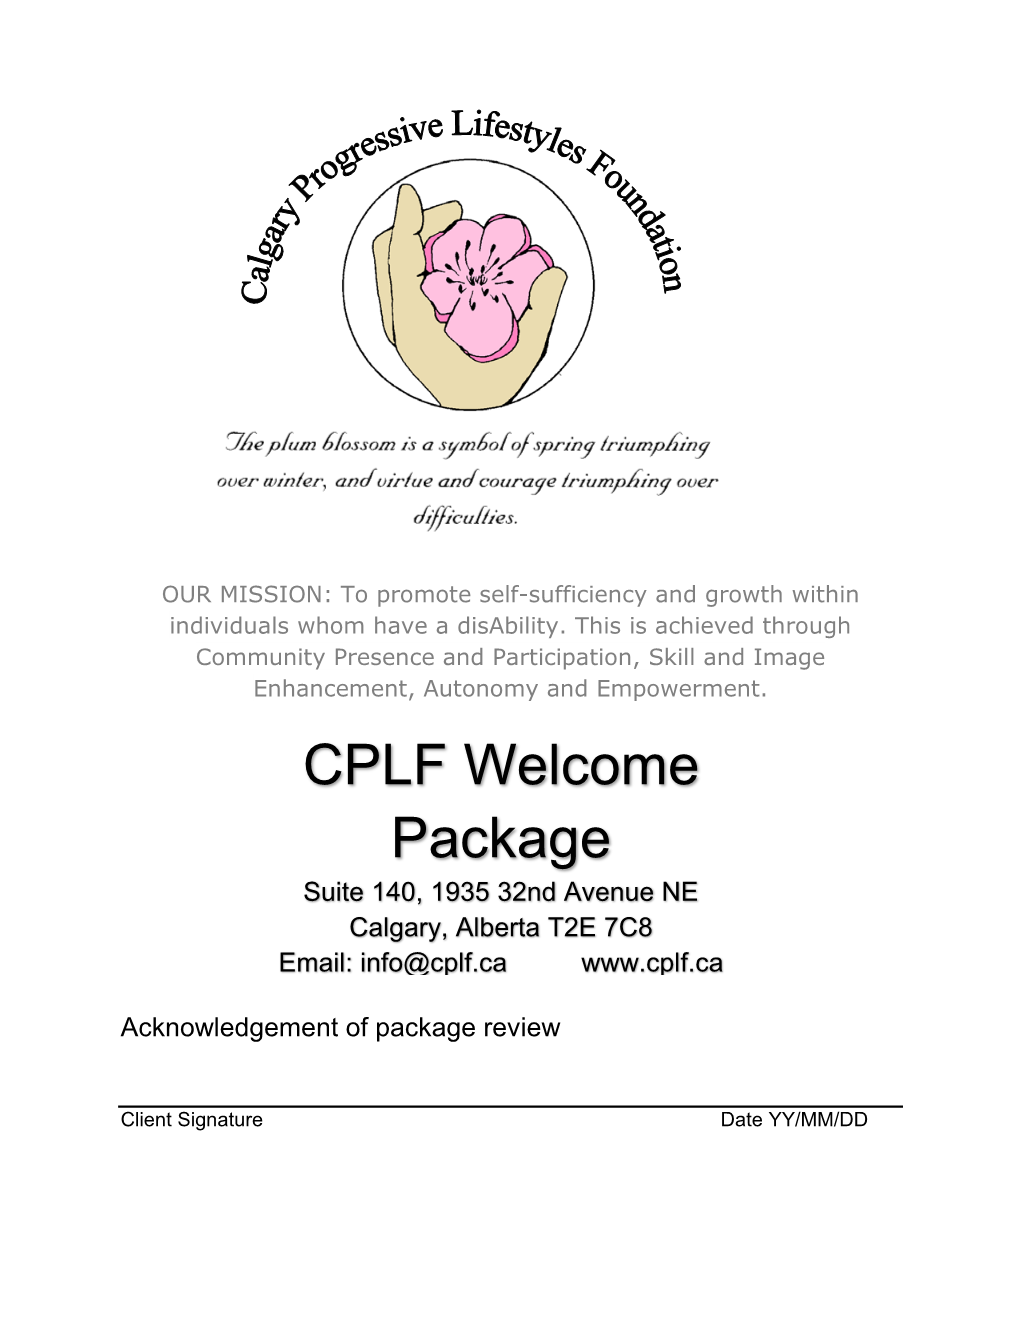 CPLF Welcome Package 07/16 Page 2